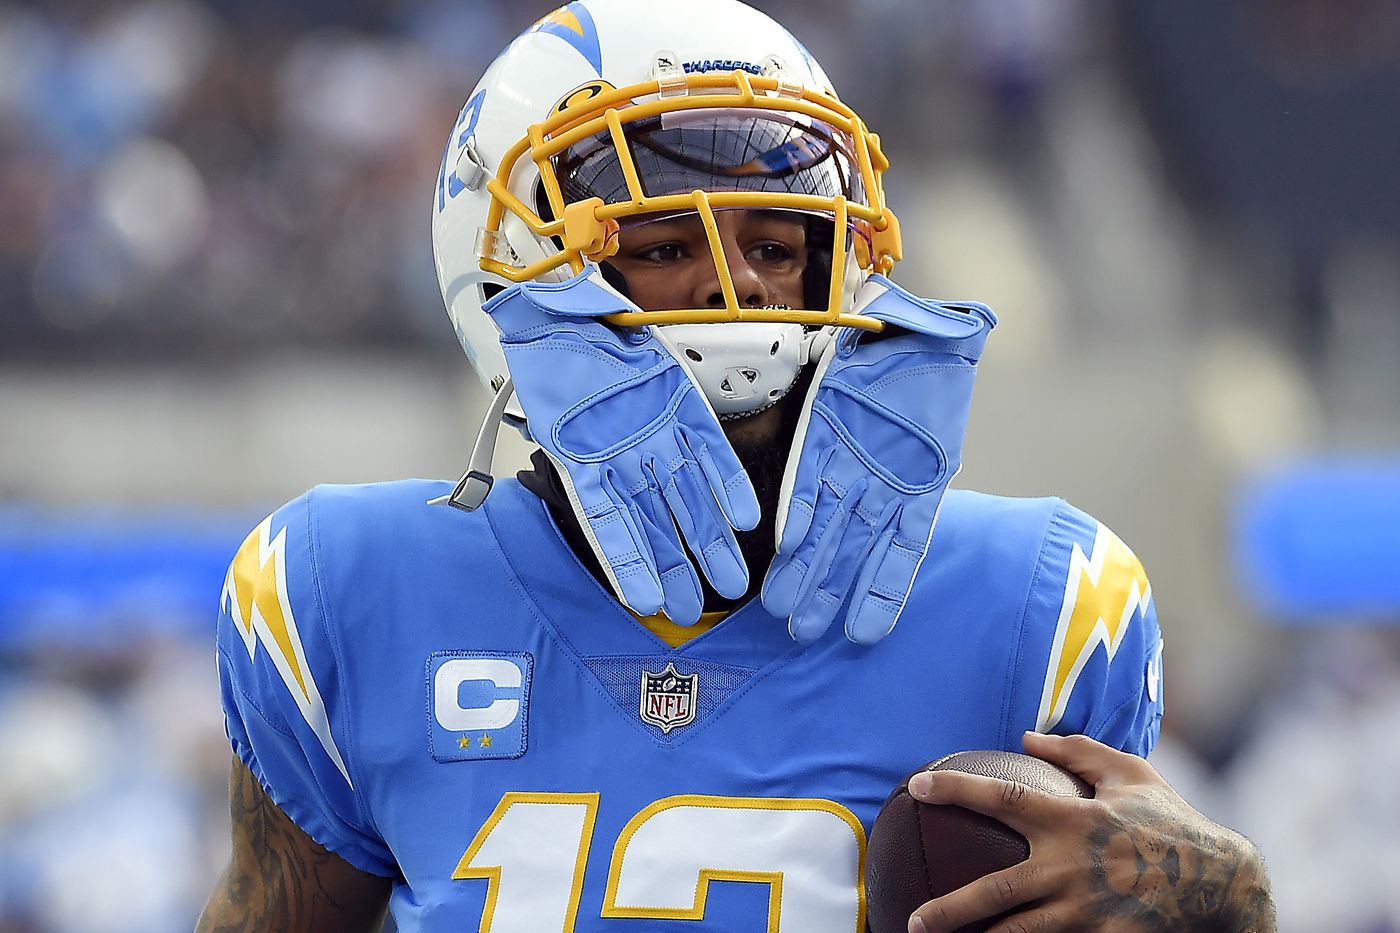 Chargers News: Bolts unveil 2022 uniform schedule - Bolts From The